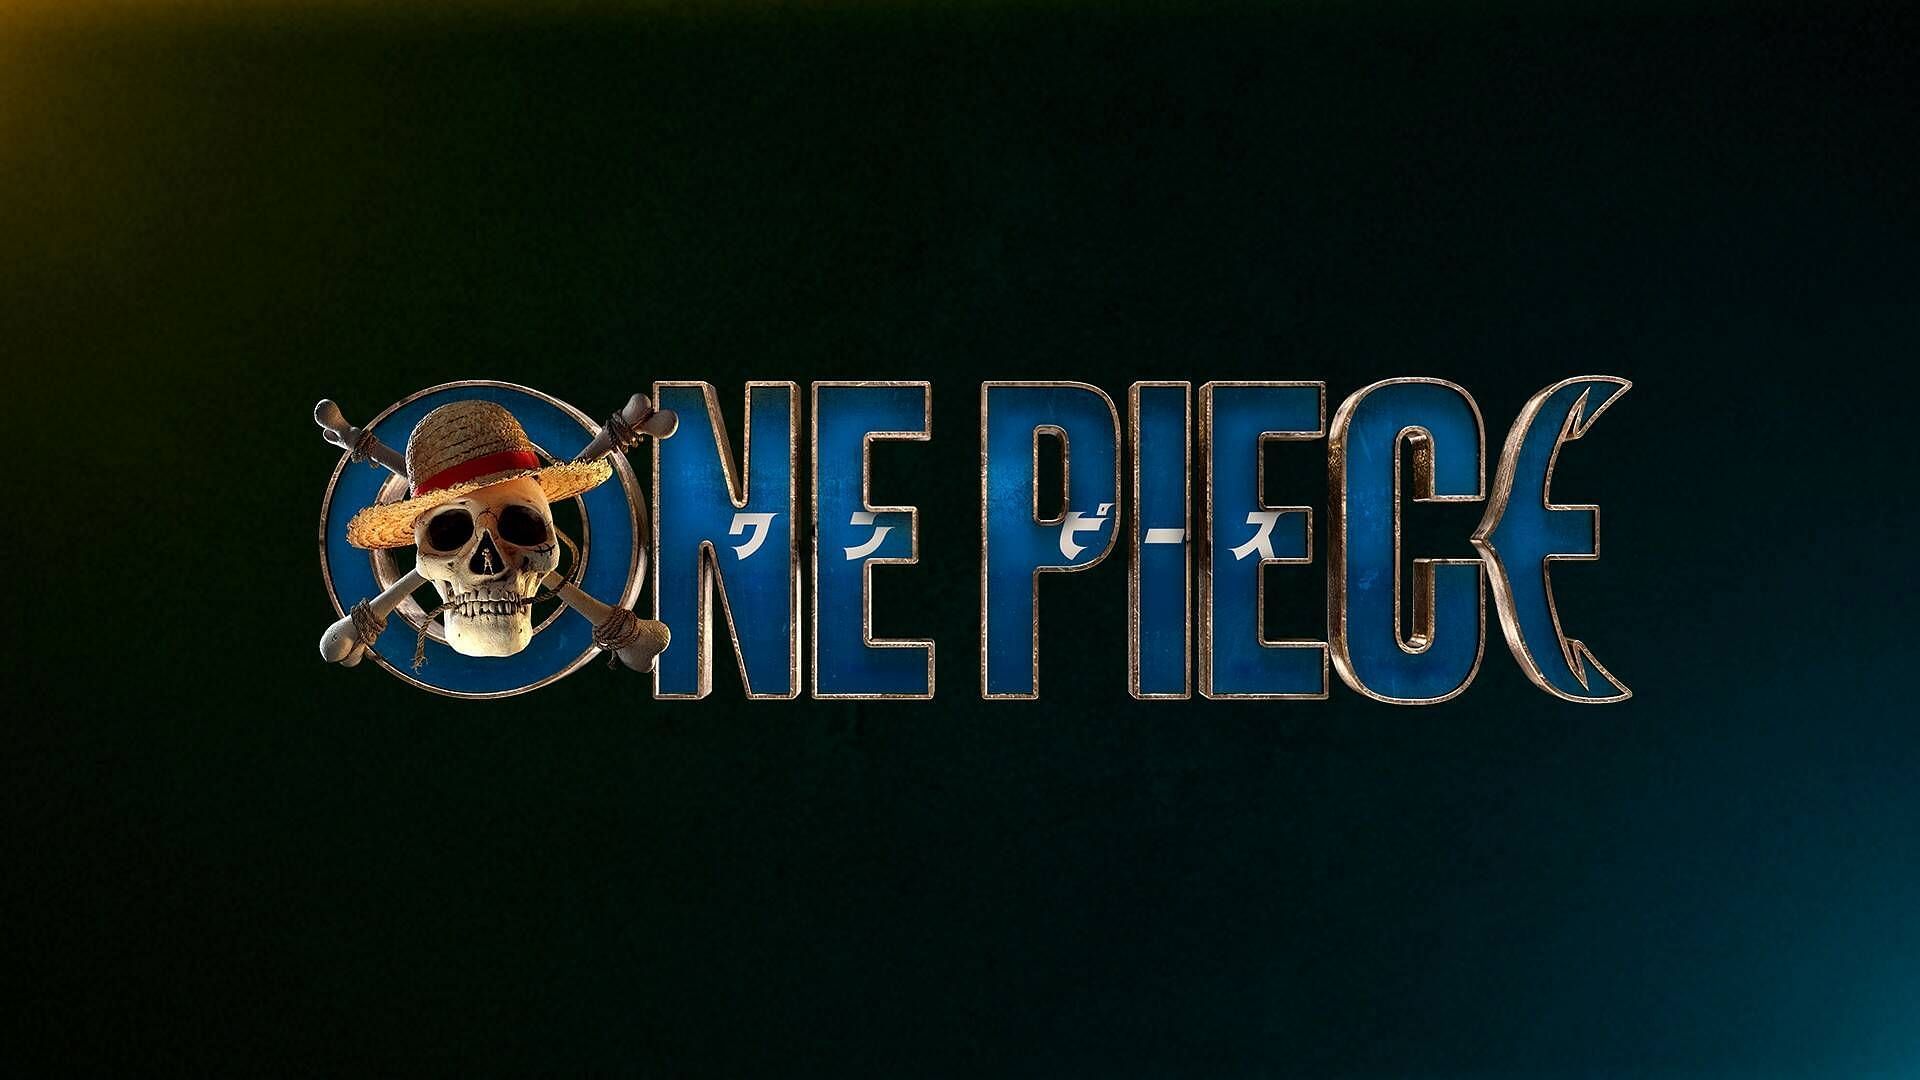 As the first part of One Piece Live Action was a success, fans can